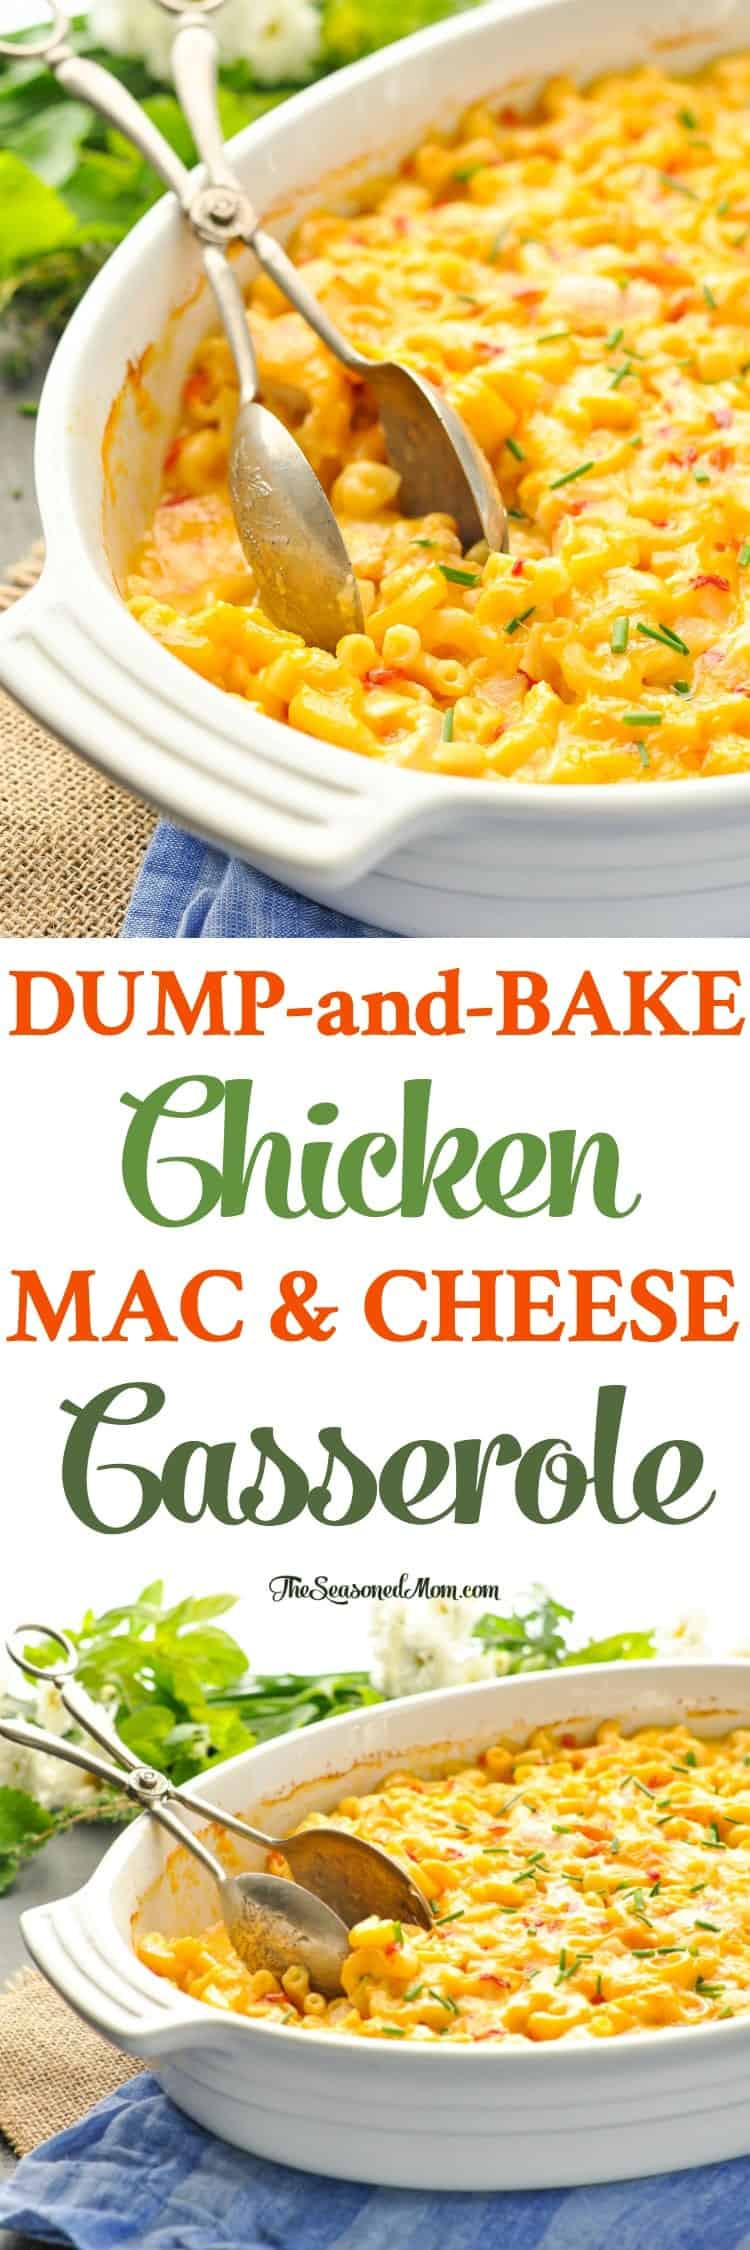 Baked Macaroni And Cheese With Chicken
 Dump and Bake Chicken Mac and Cheese The Seasoned Mom